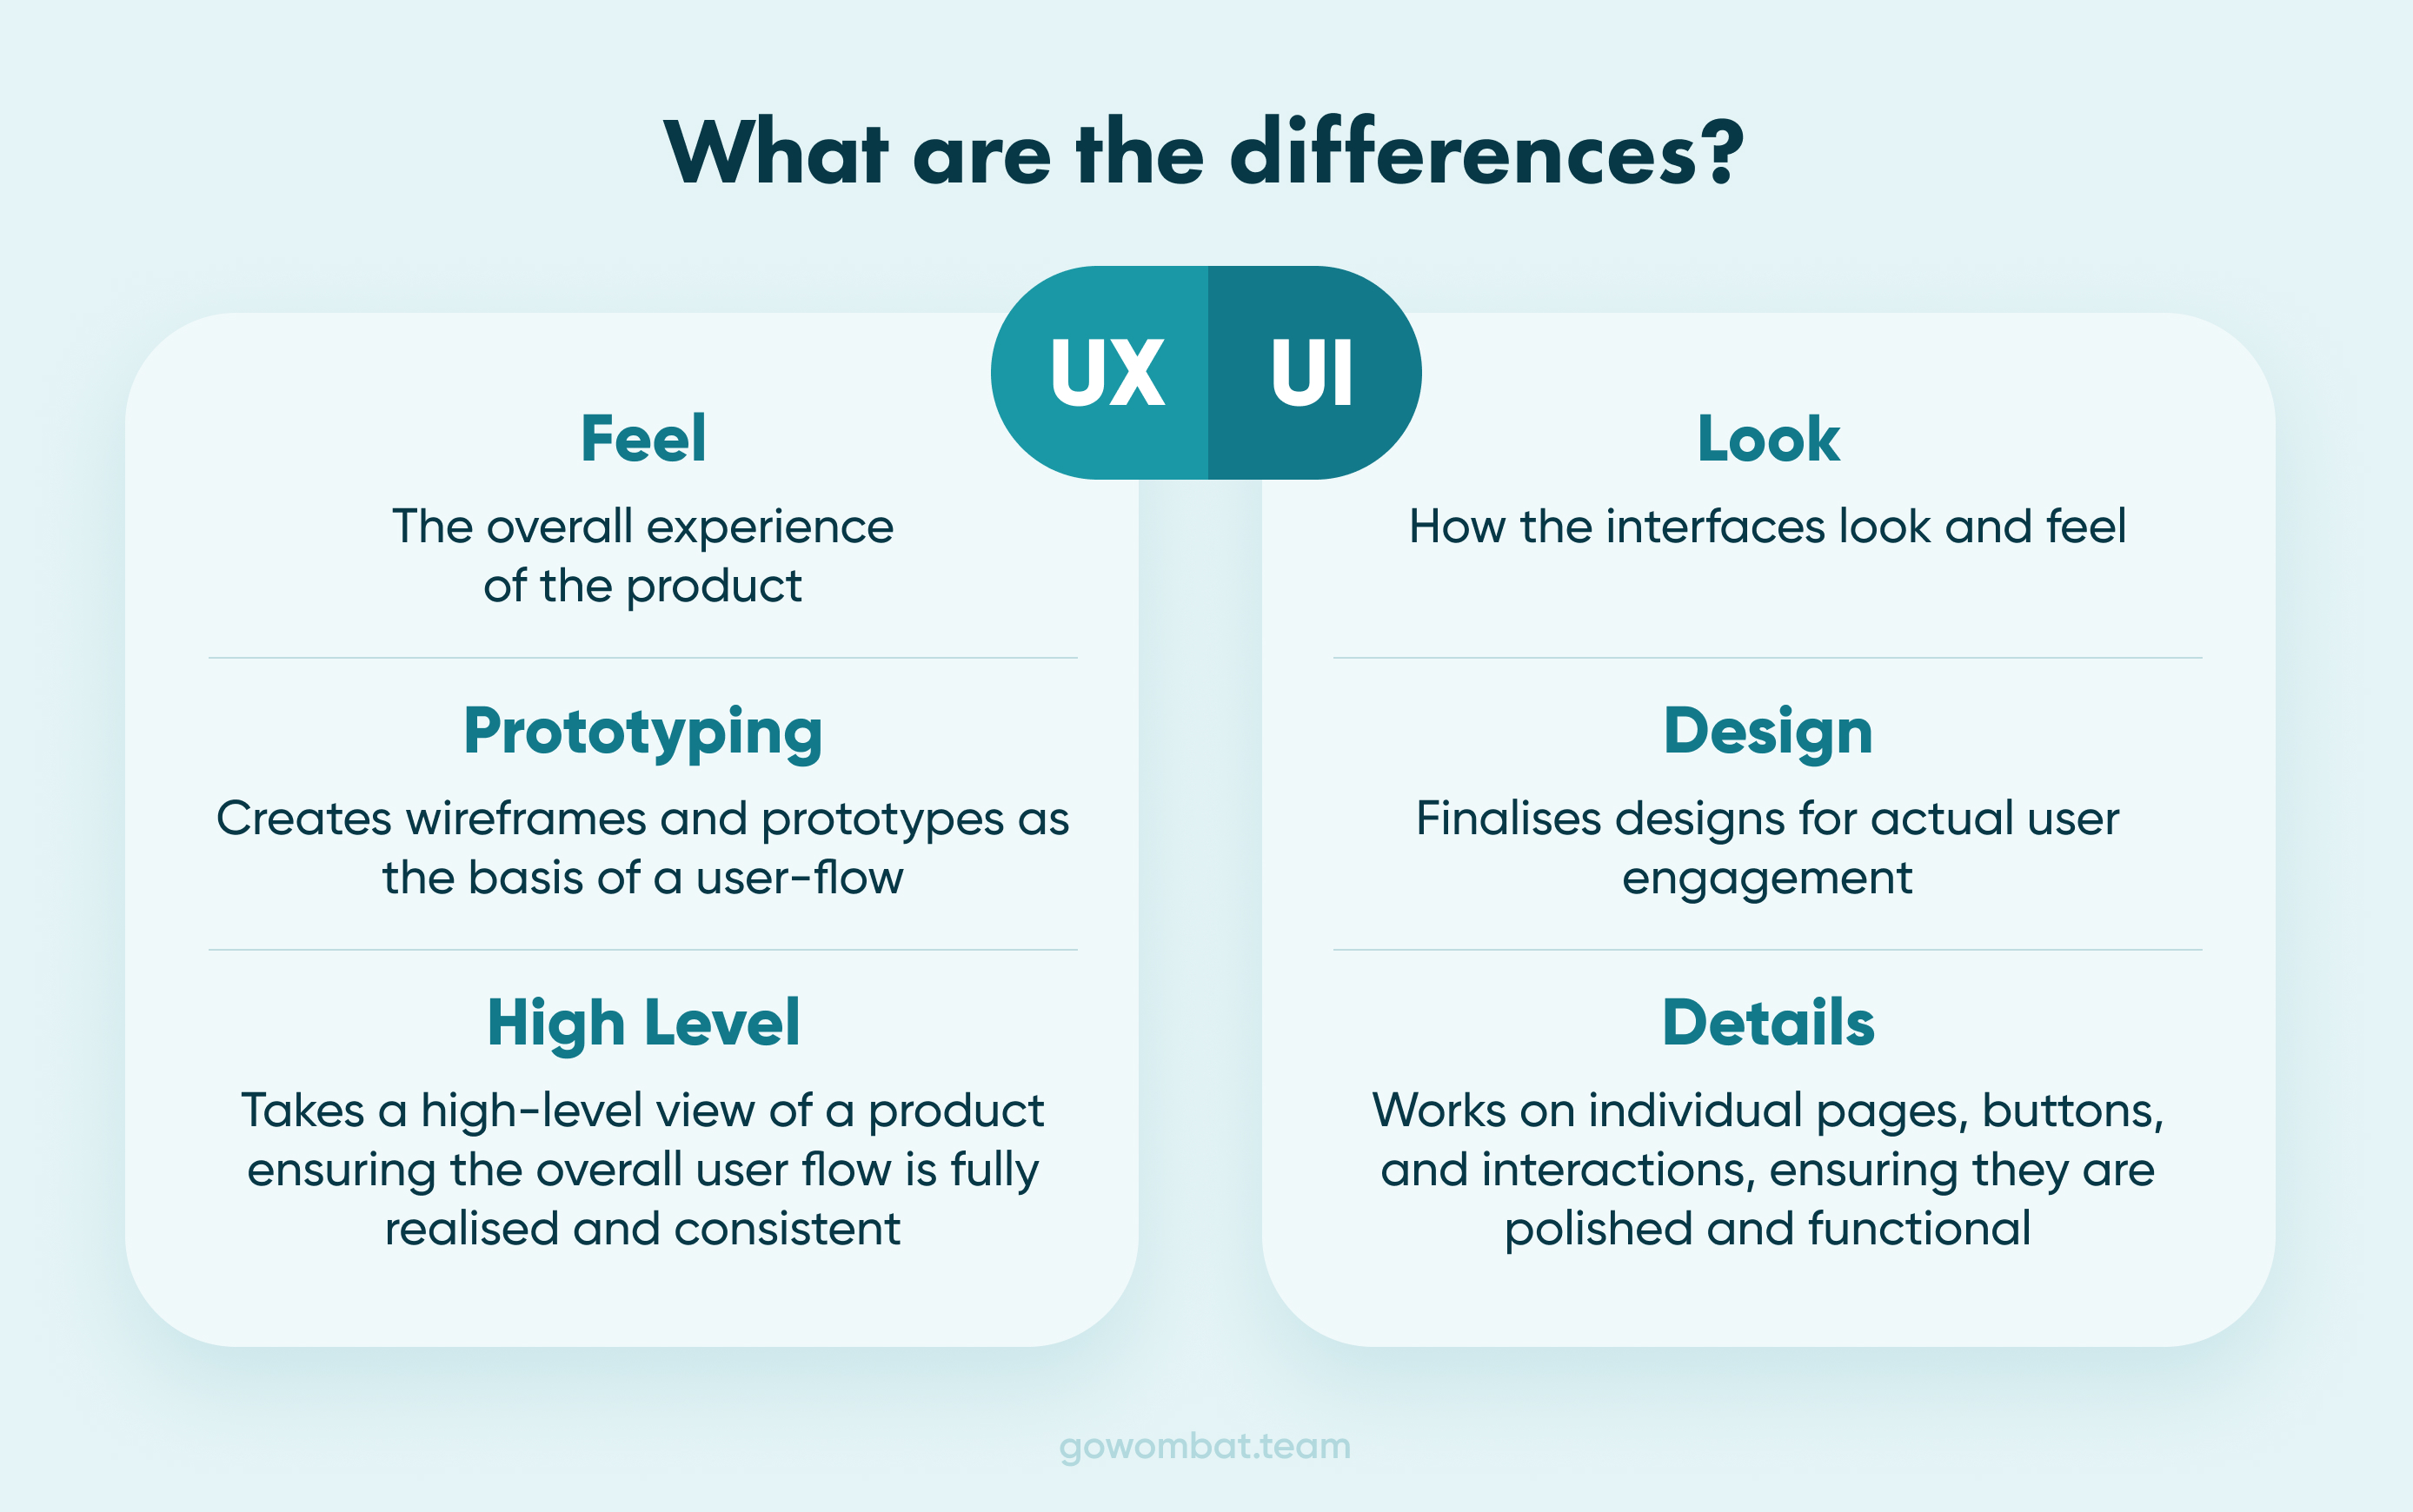 A brief look at the differences between UI and UX design?